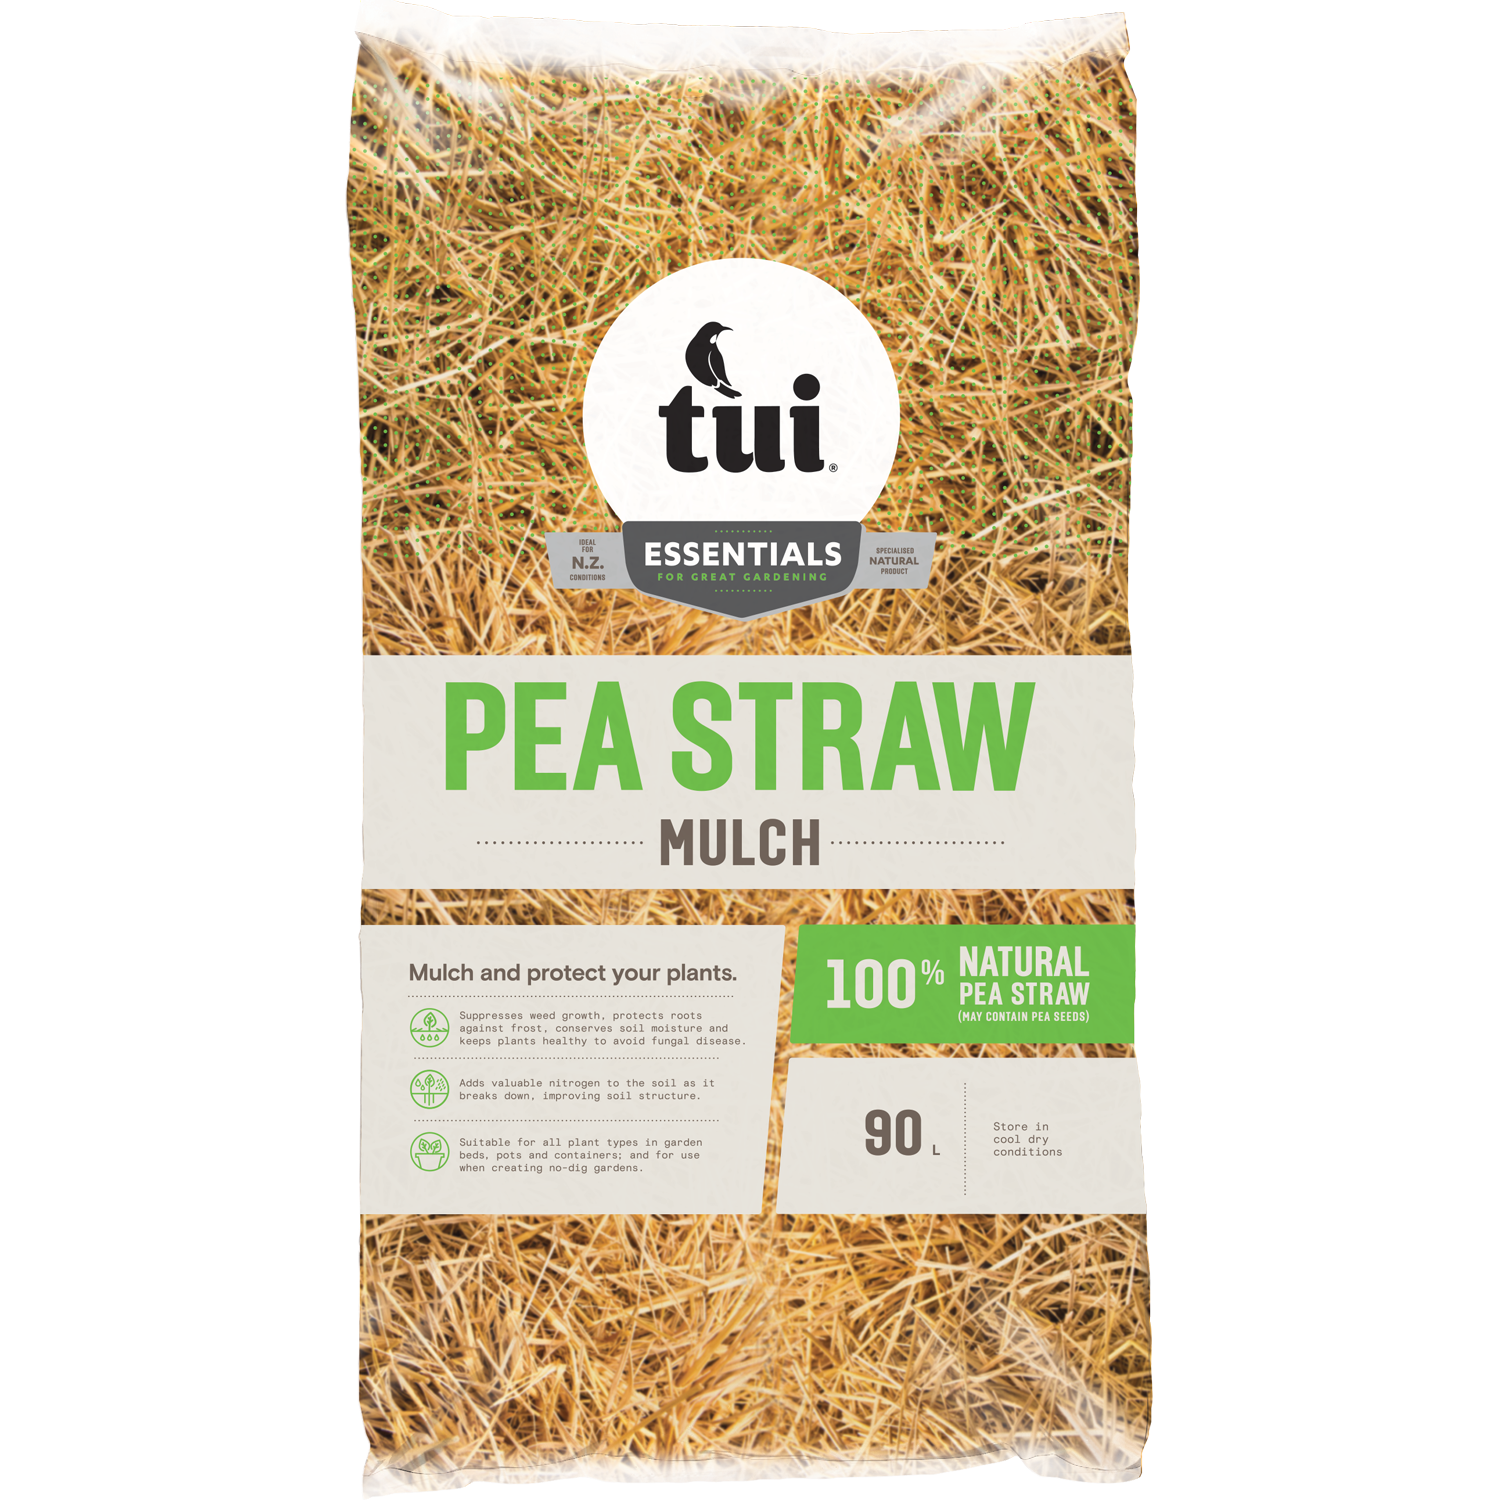 Image of Pea straw mulch suppressing weeds